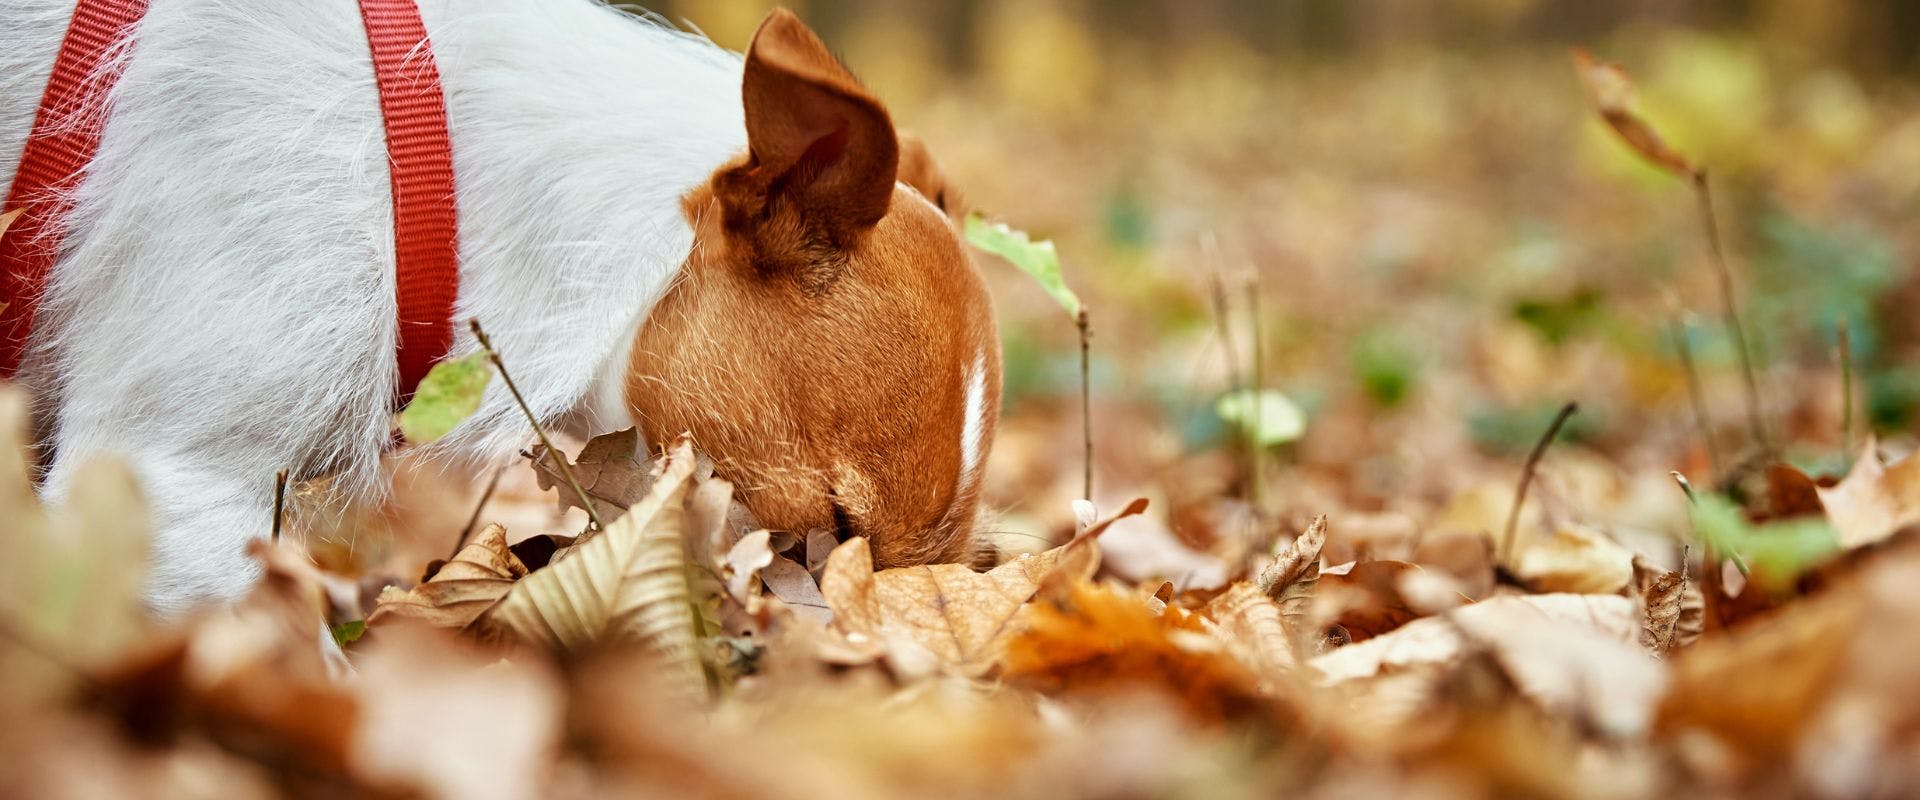 Jack Russell sniffing in the leaves 